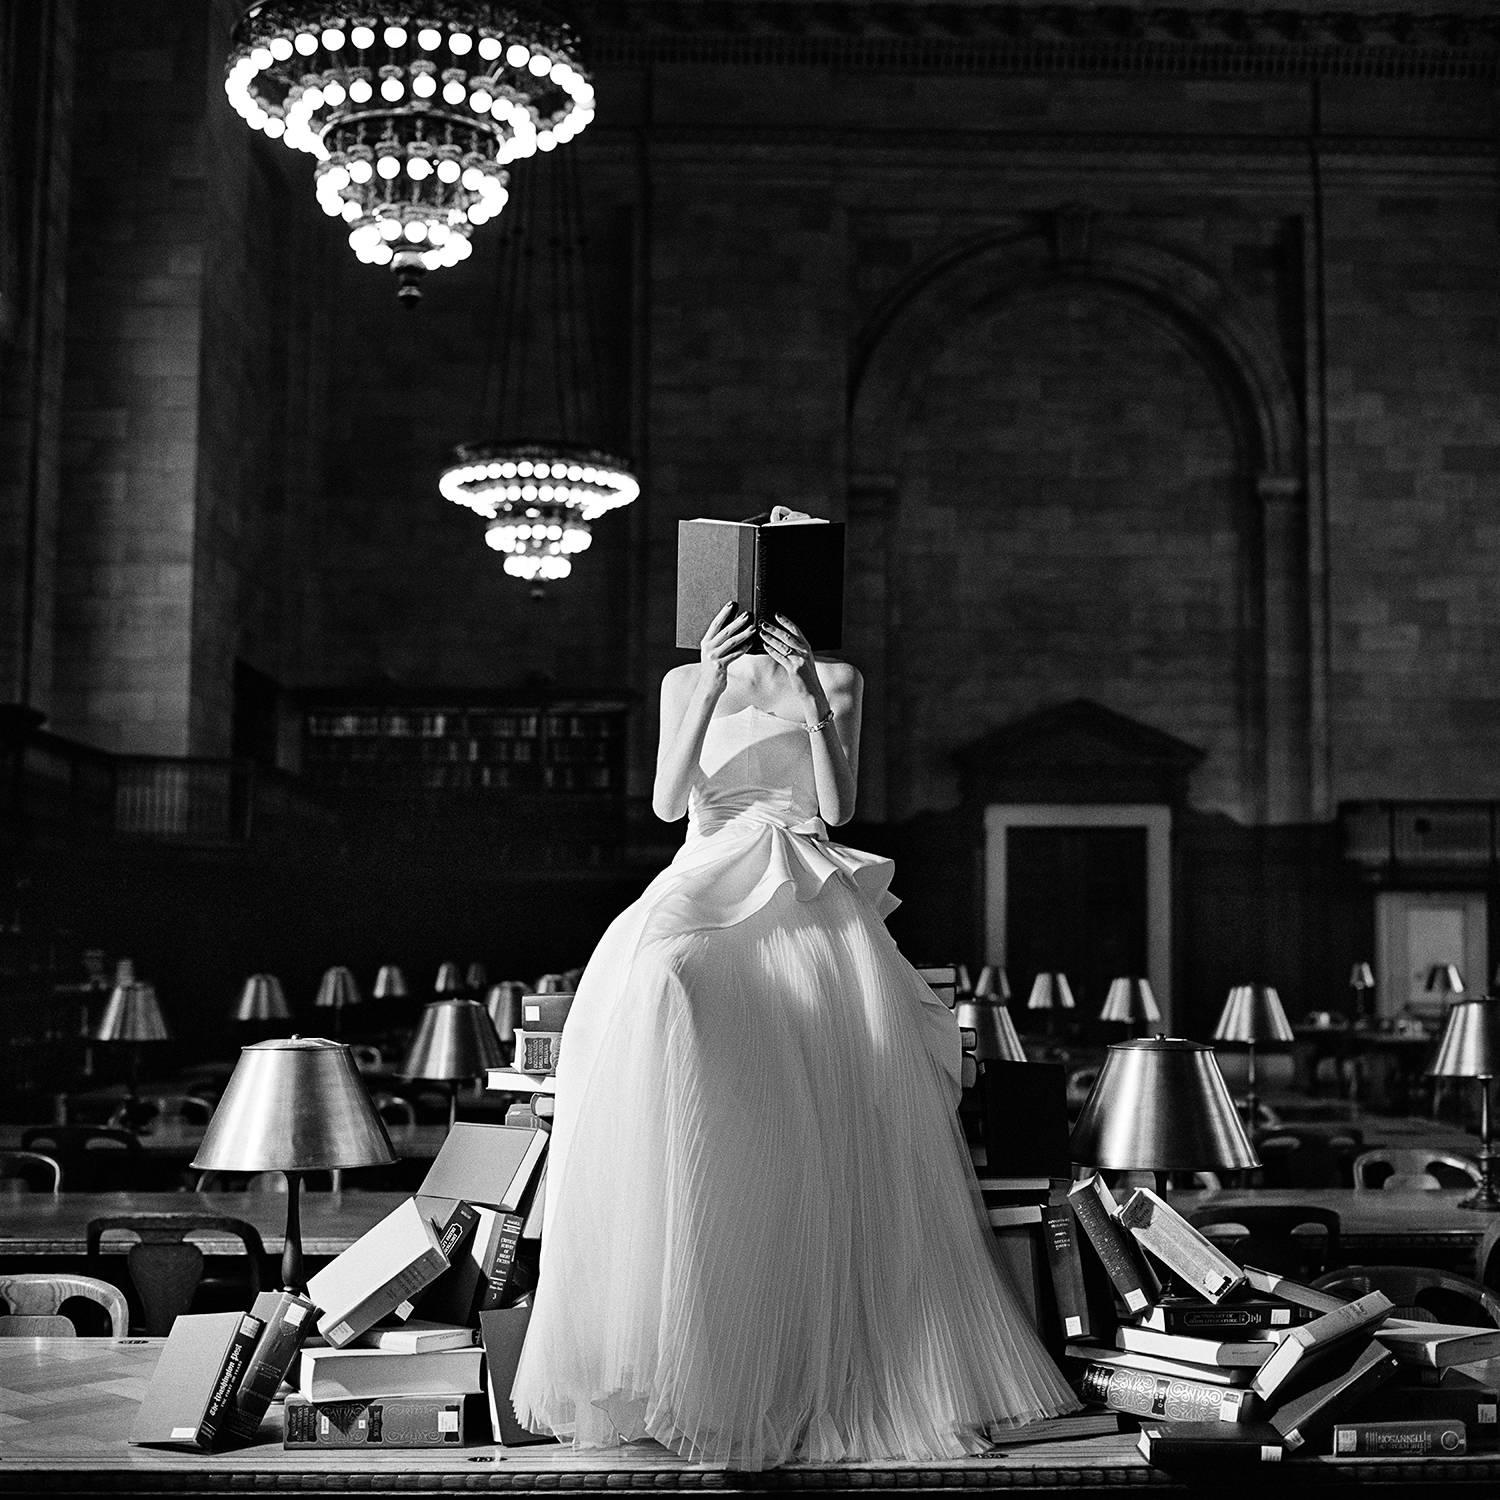 Rodney Smith Figurative Photograph - Flynn Reading on a Pile of Books, New York, NY- black and white fashion photo